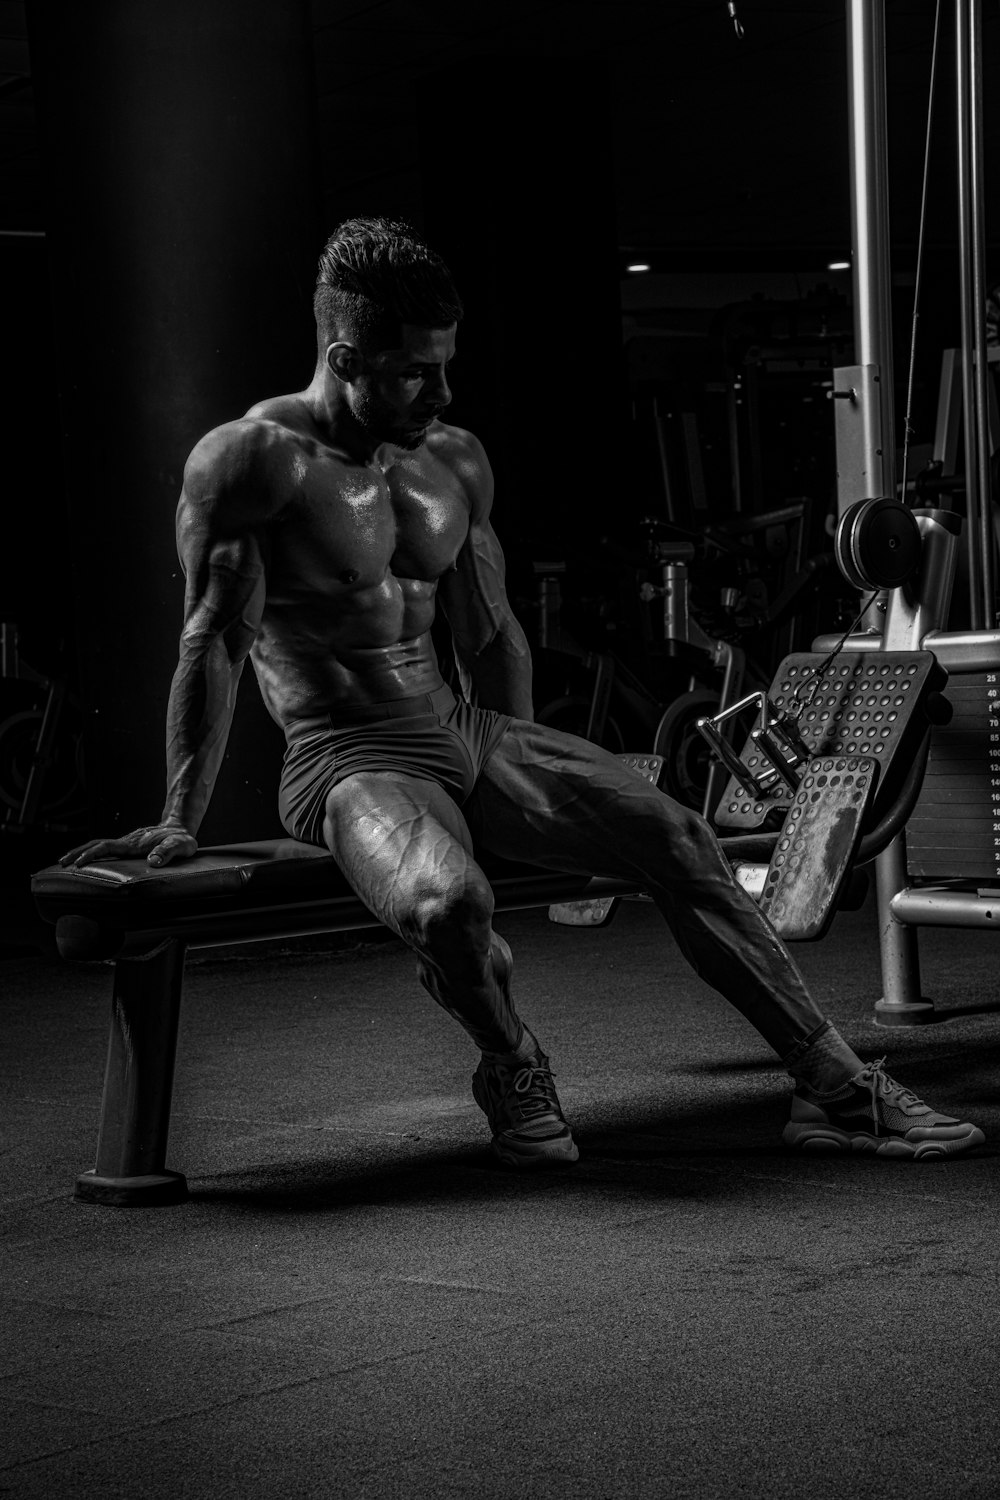 A man sitting on a bench in a gym photo – Free Black Image on Unsplash